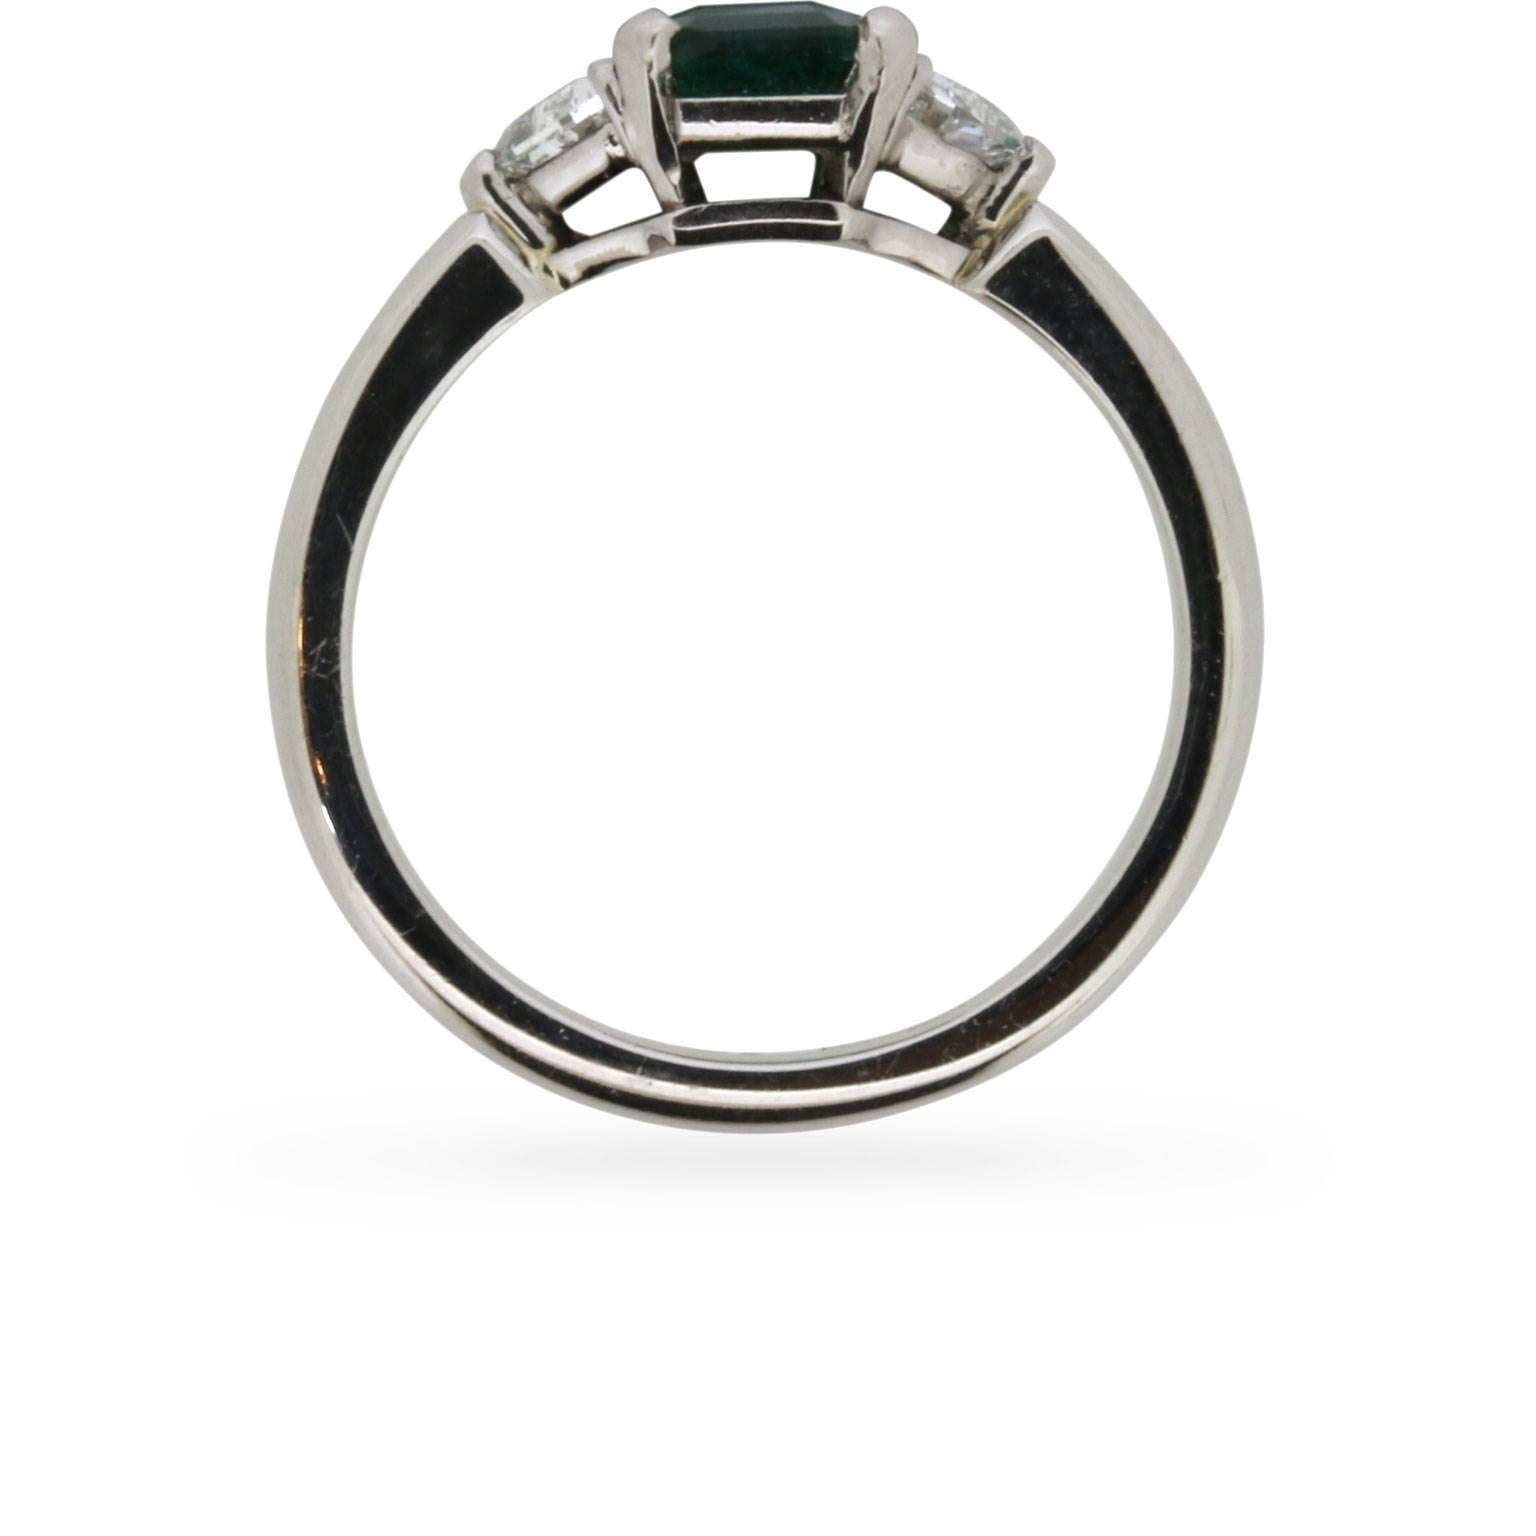 A lovely piece which highlights a stunning 0.70 carat Emerald with two shield diamonds either side, totalling 0.70 carats. This vintage ring has a clean and modern feel to the platinum band and claw settings for the stones.

Its near symmetry and